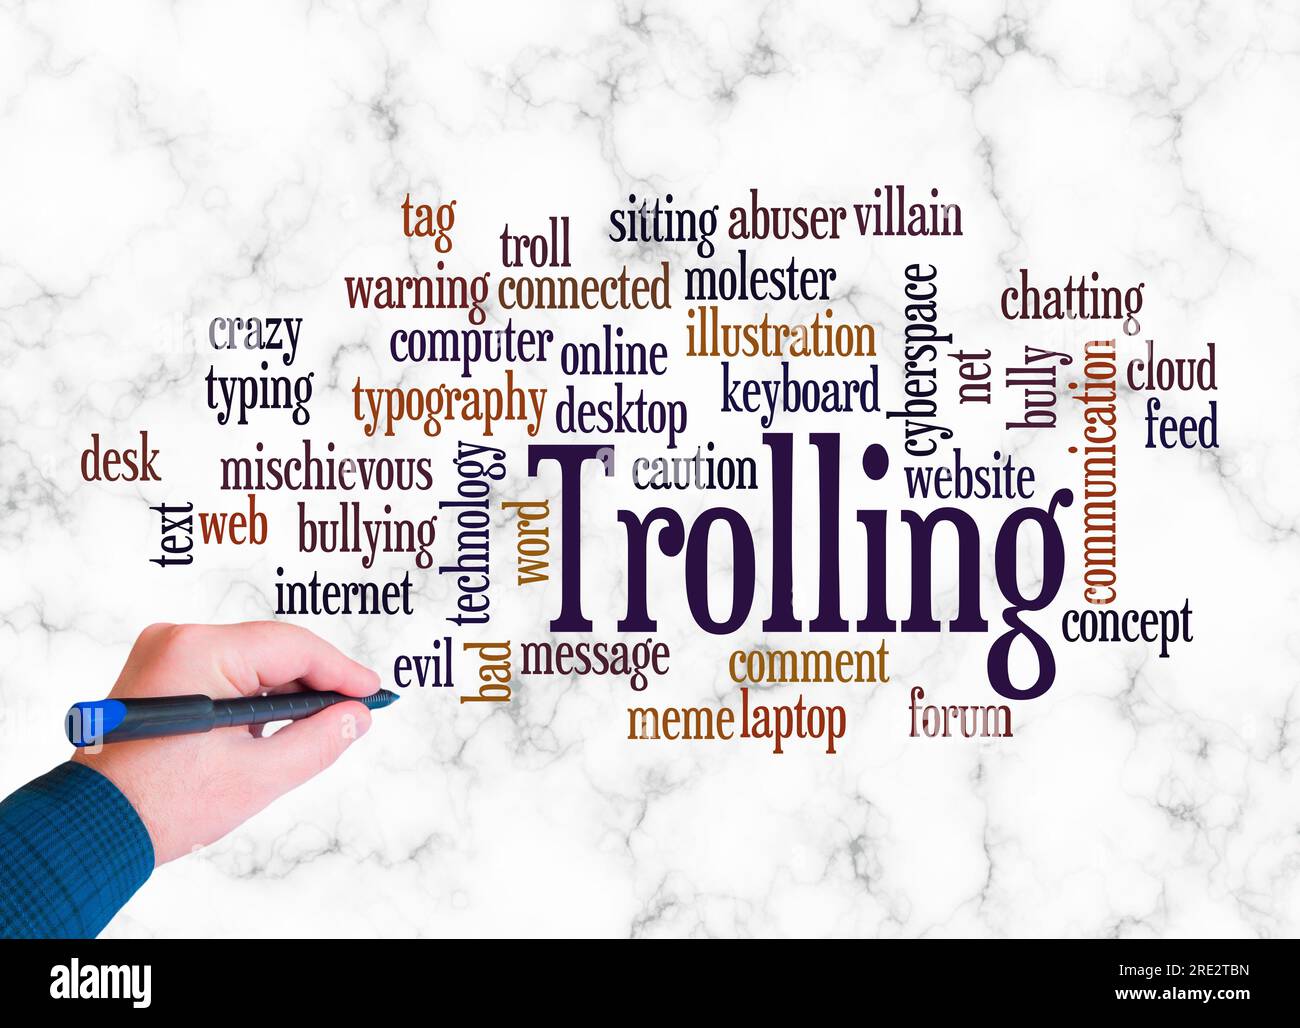 Word Cloud with TROLLING concept create with text only. Stock Photo